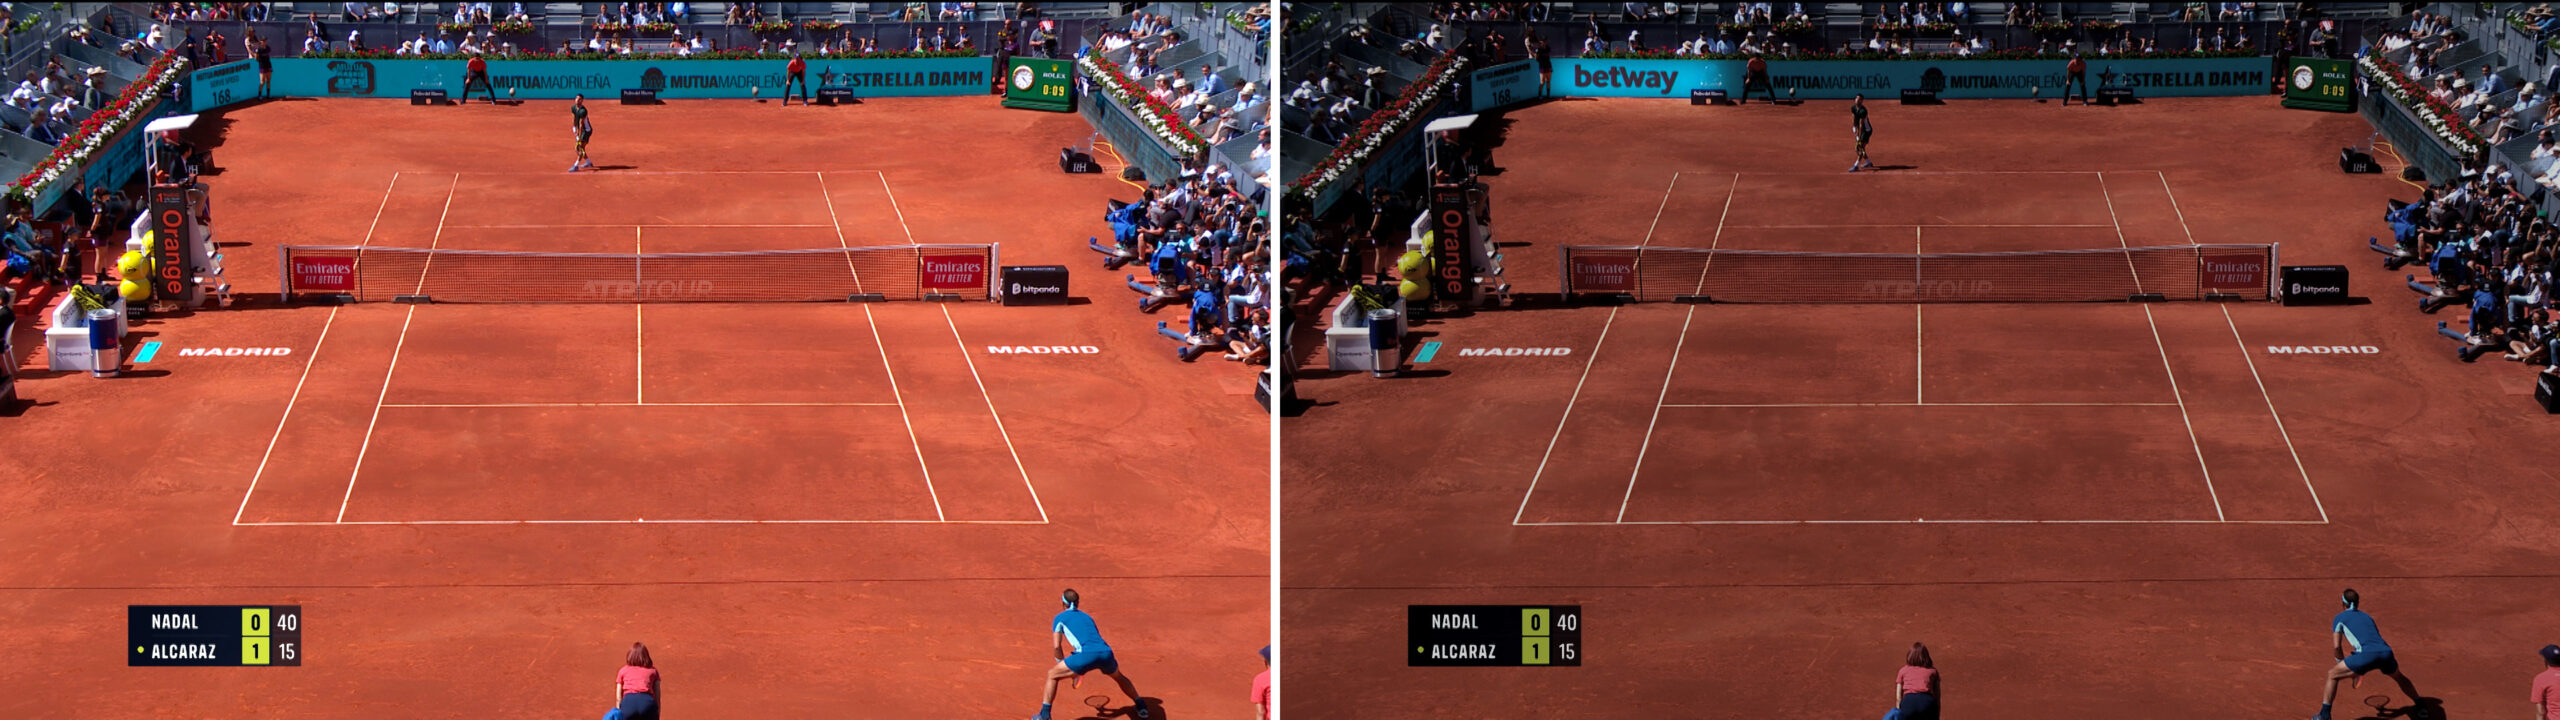 ATP Media Chooses uniqFEED to Deliver Virtual Advertising at 2023 Mutua Madrid Open.